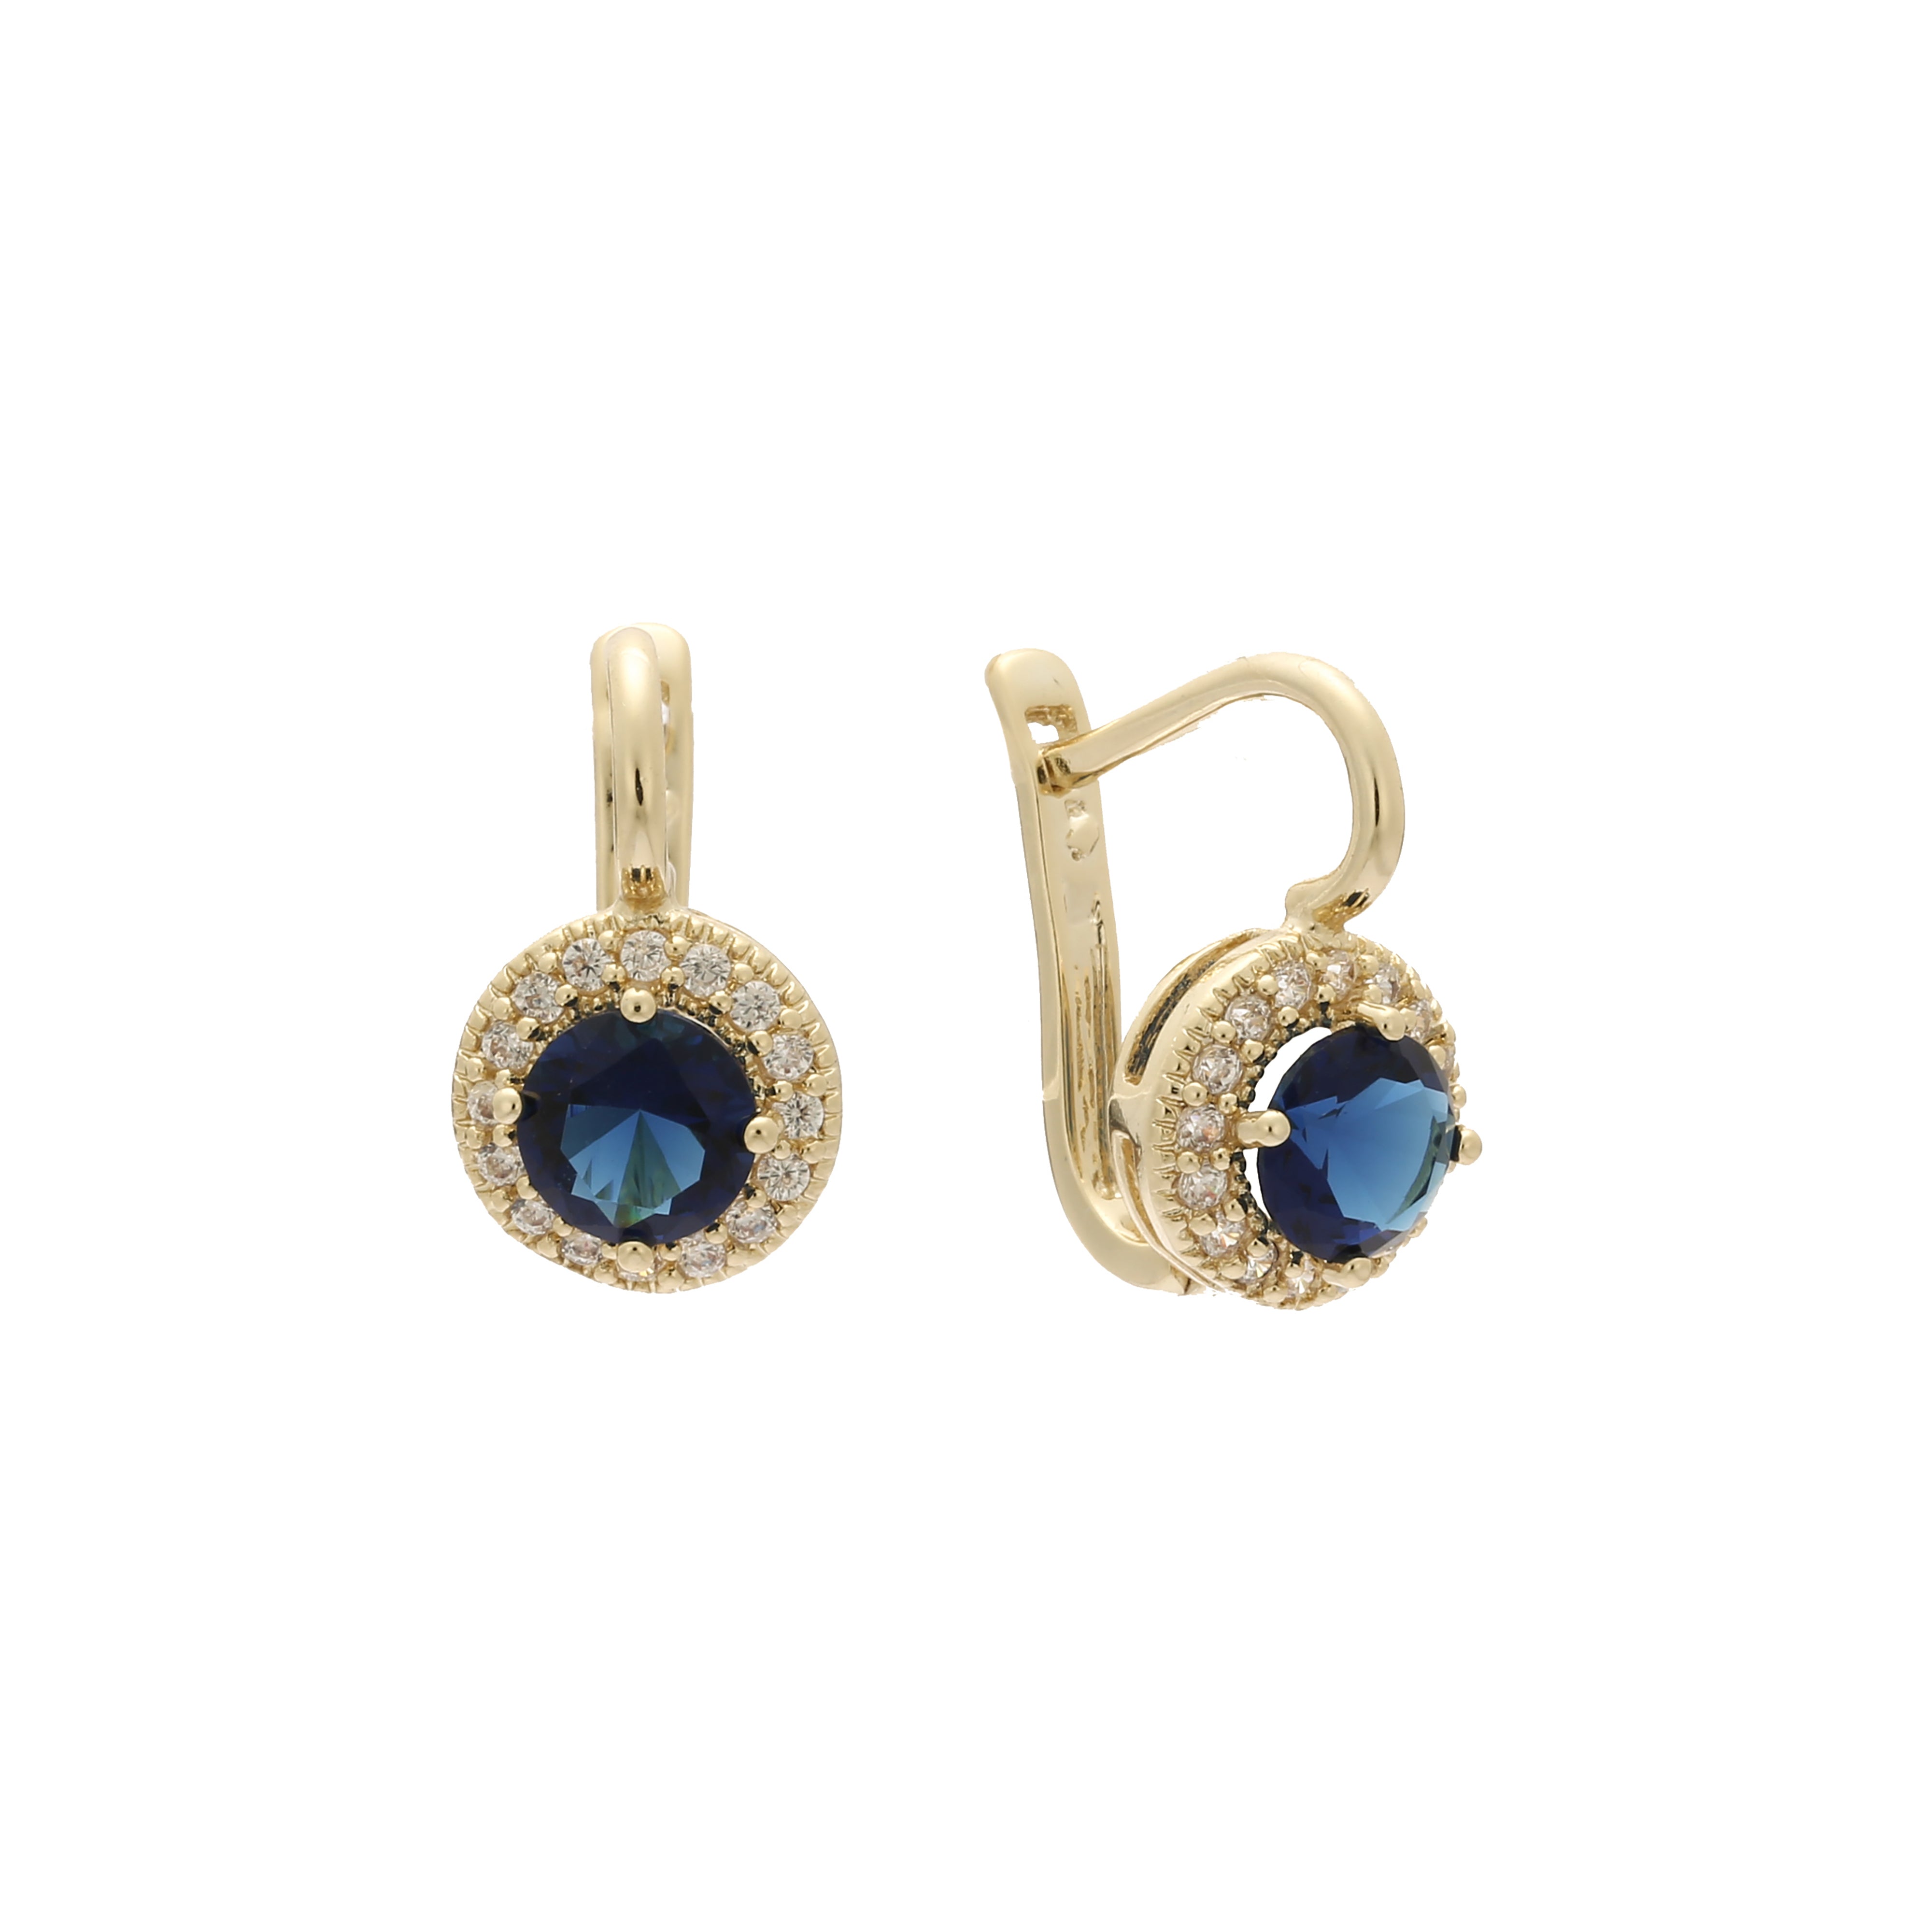 .Halo colorful cz earrings plated in 14K Gold, Rose Gold